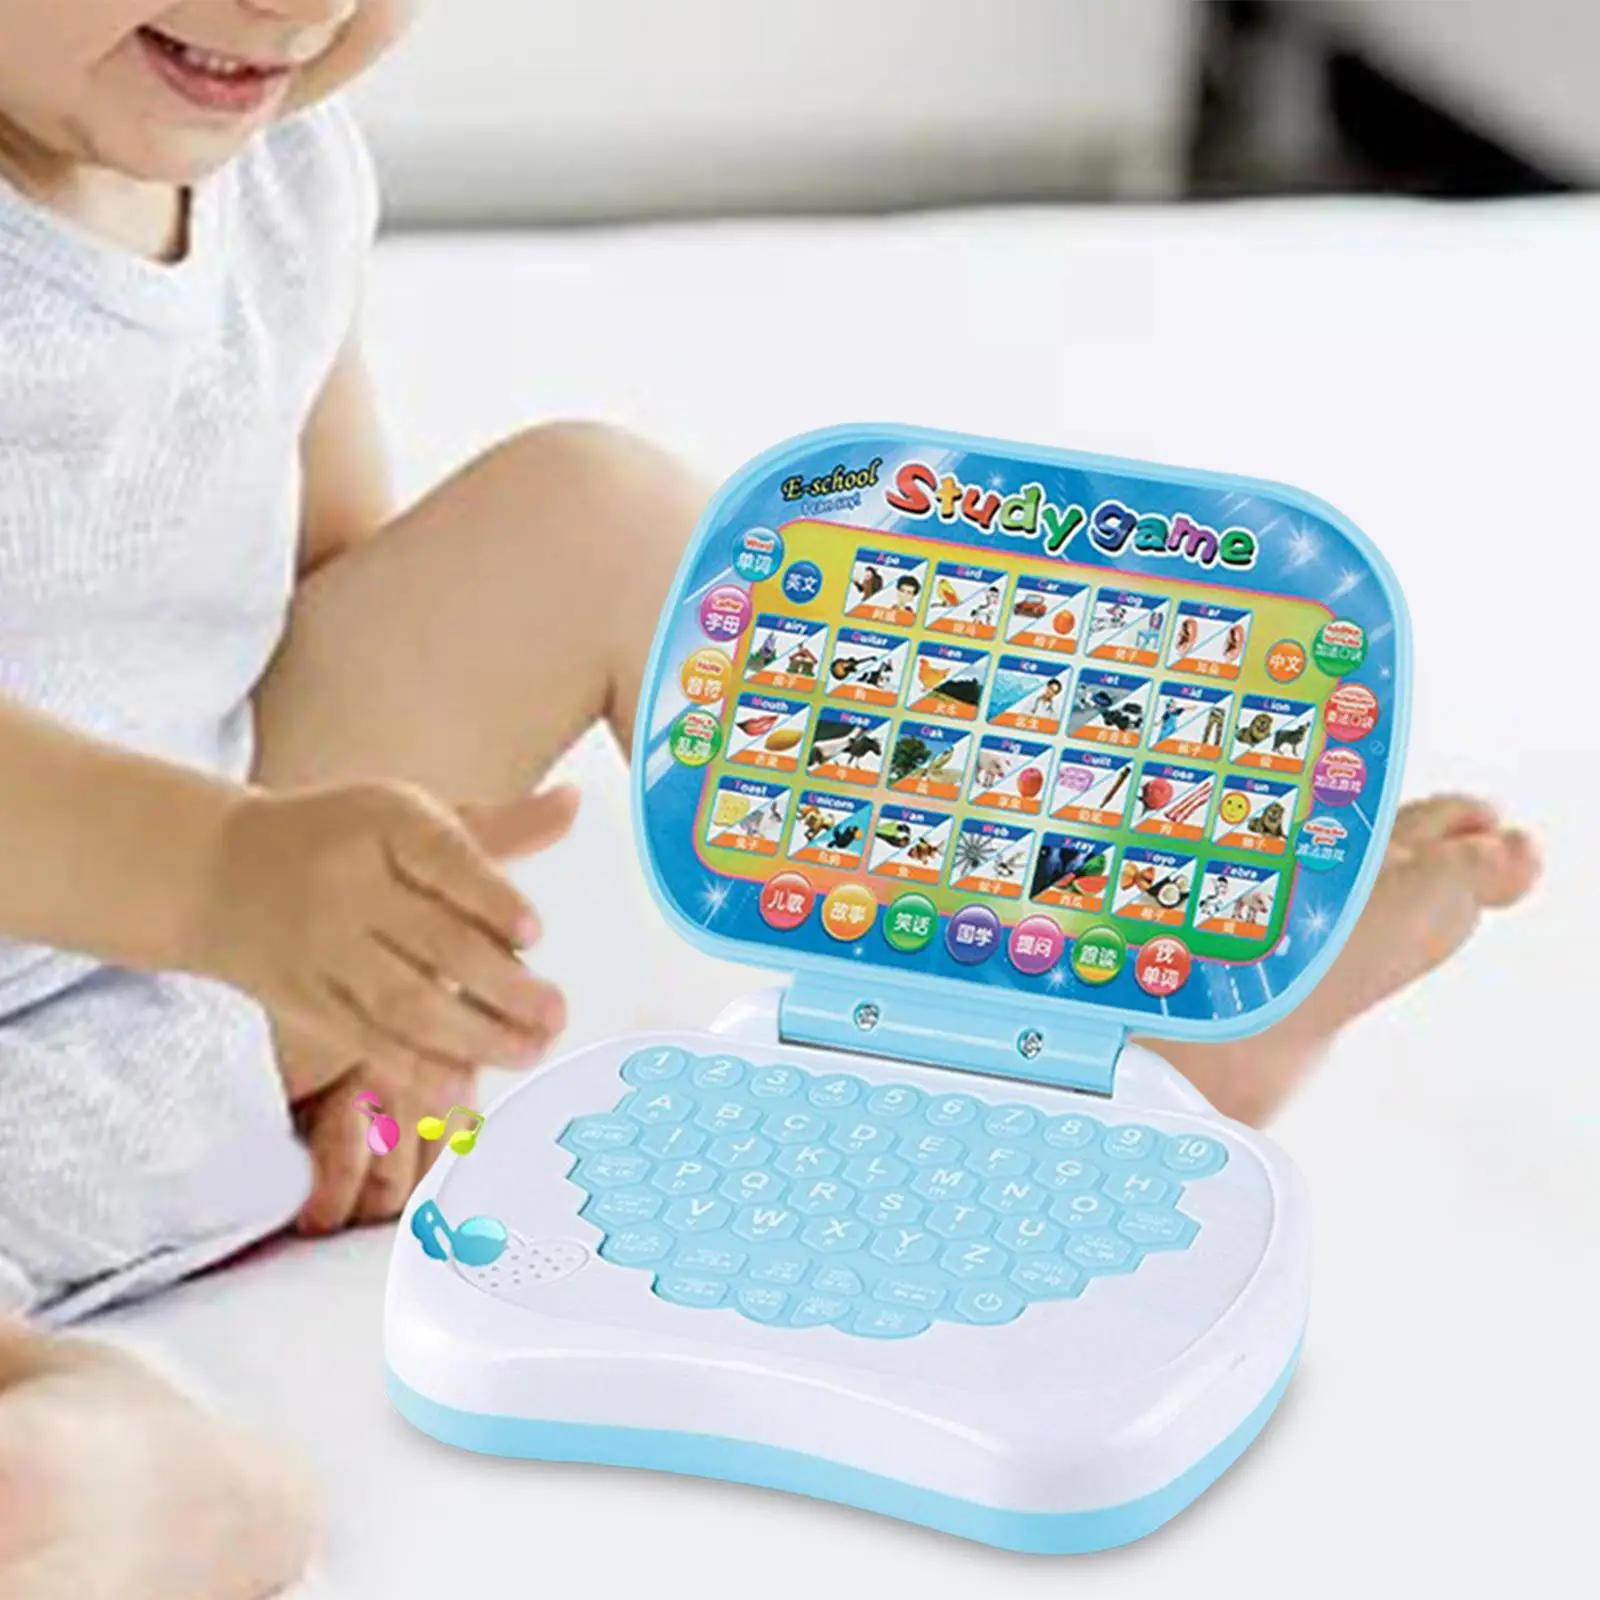 Multifunction Learning Machine Study Game Computer Activities Kids Laptop Toy for Toddler Kids Girls Boys Children Bithday Gifts